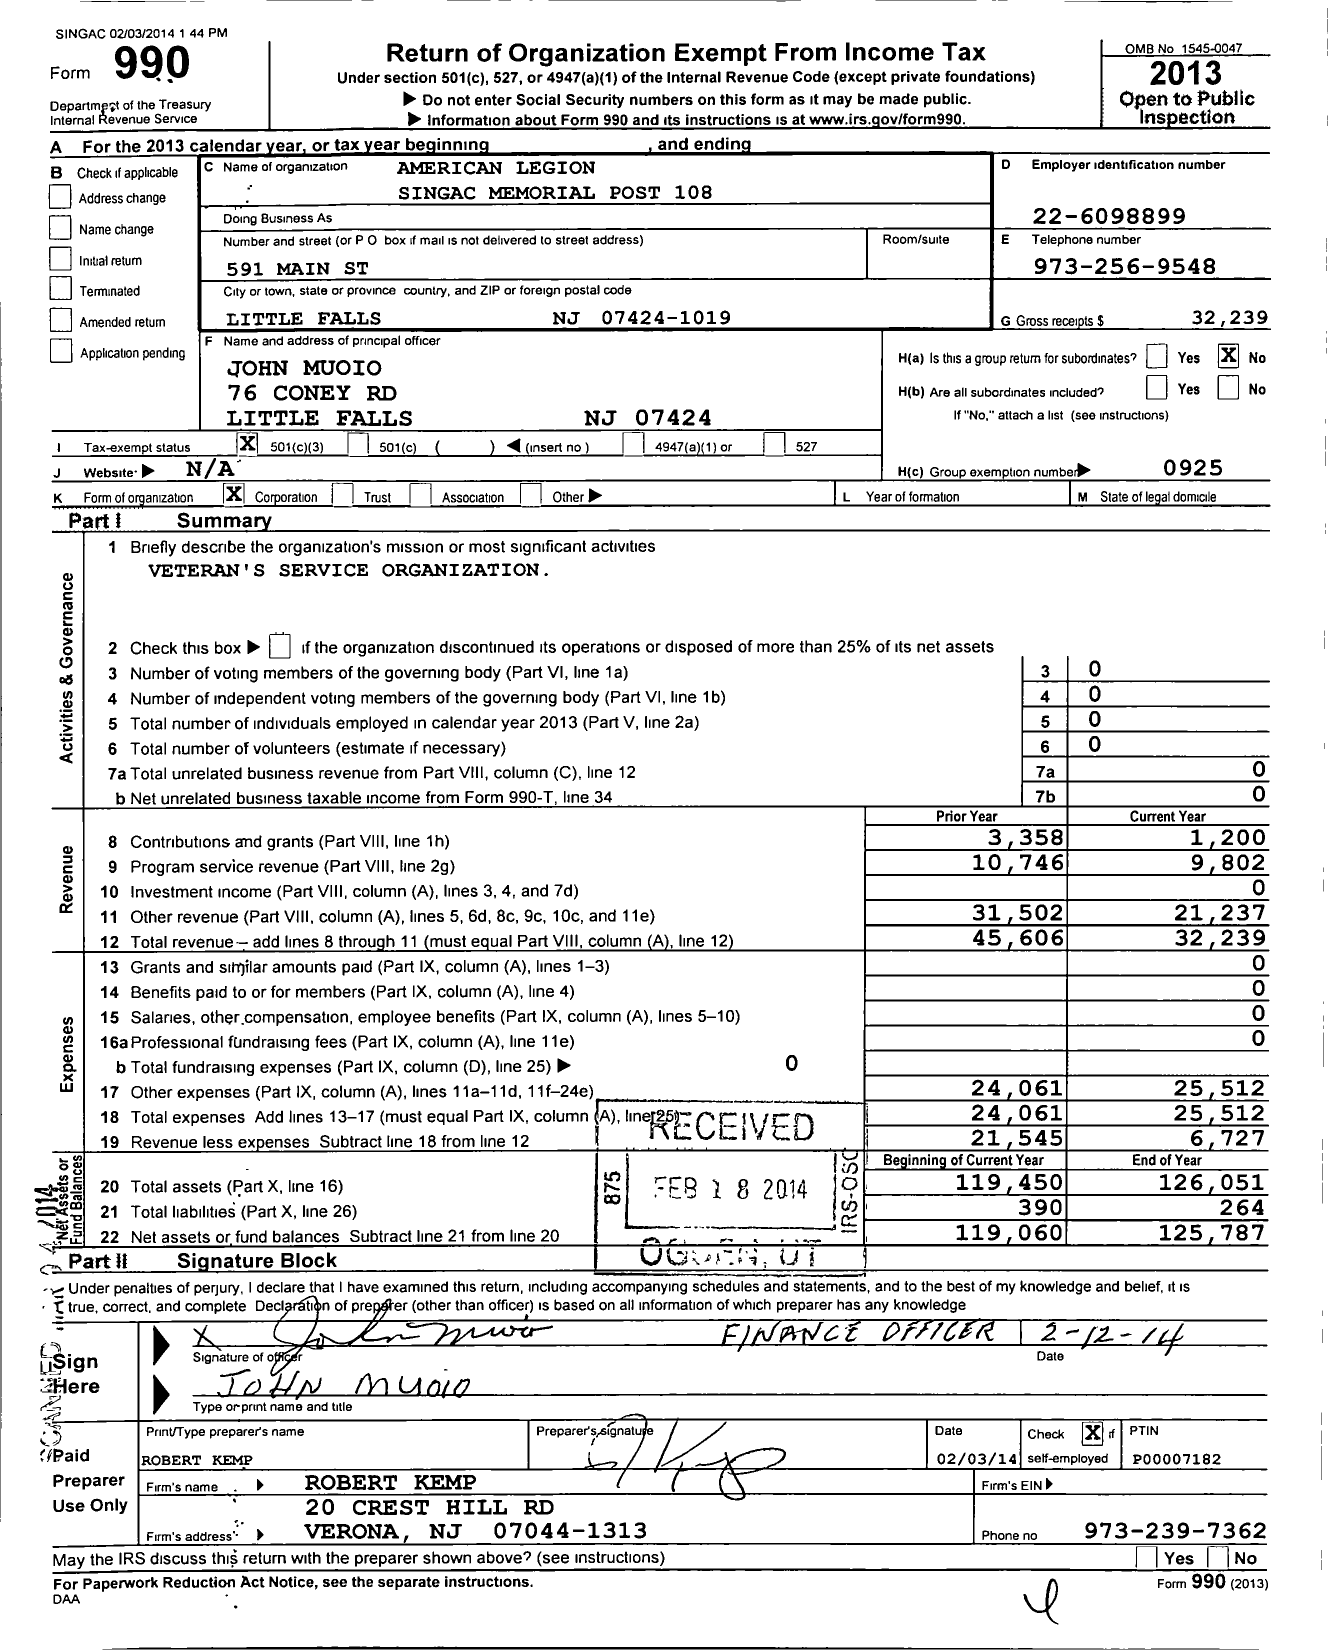 Image of first page of 2013 Form 990 for American Legion Singac Memorial Post 108